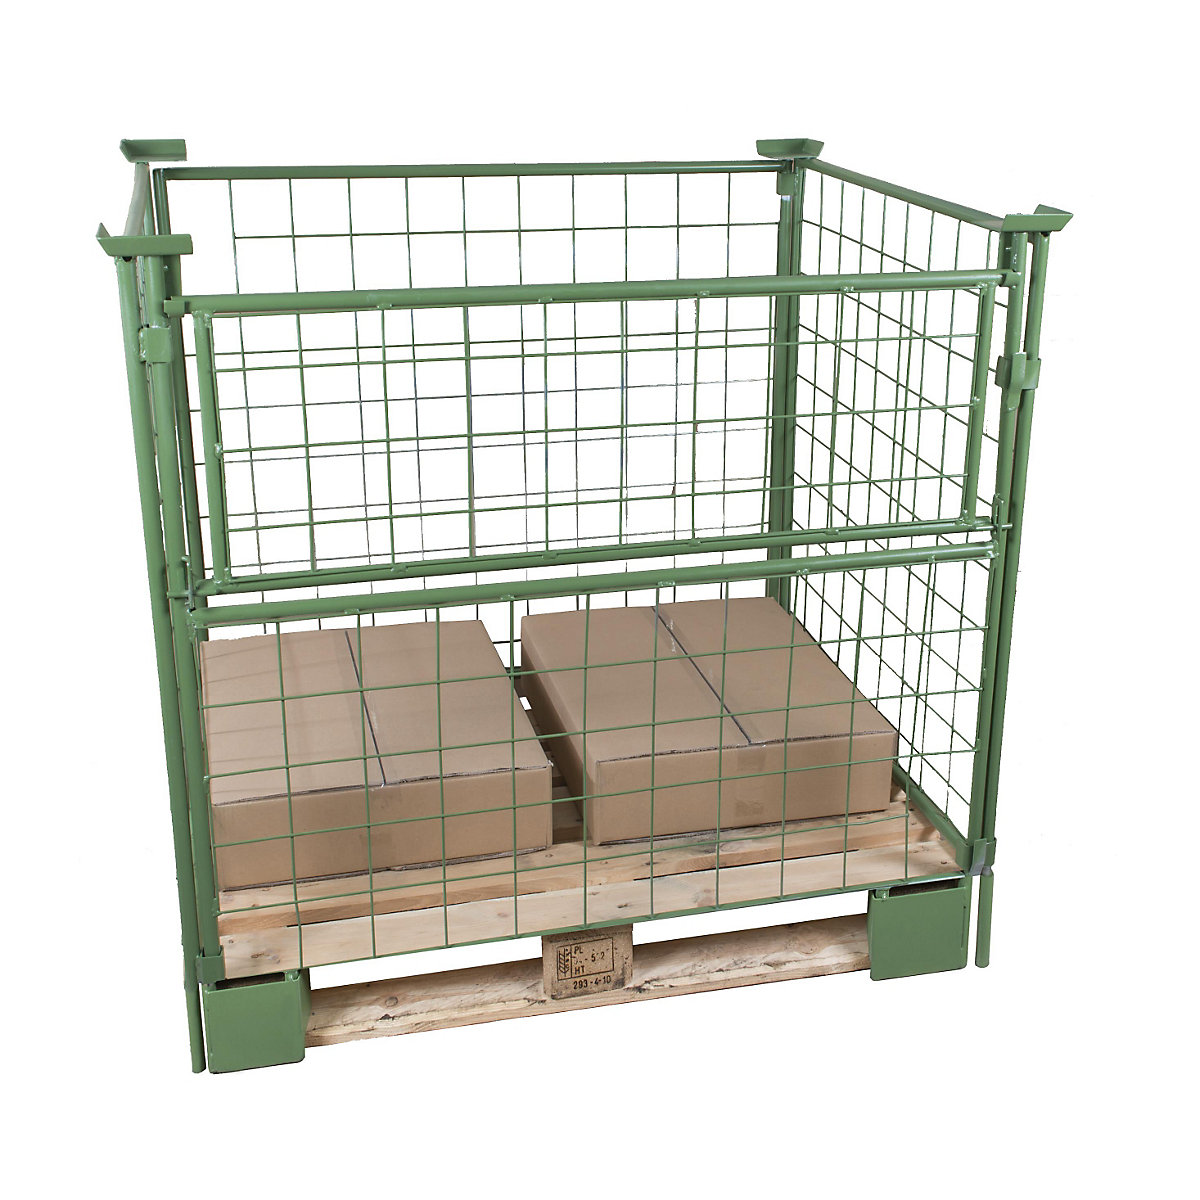 Pallet frame, effective height 1000 mm, for attaching, WxL 800 x 1200 mm, 1 long side can be half folded-2